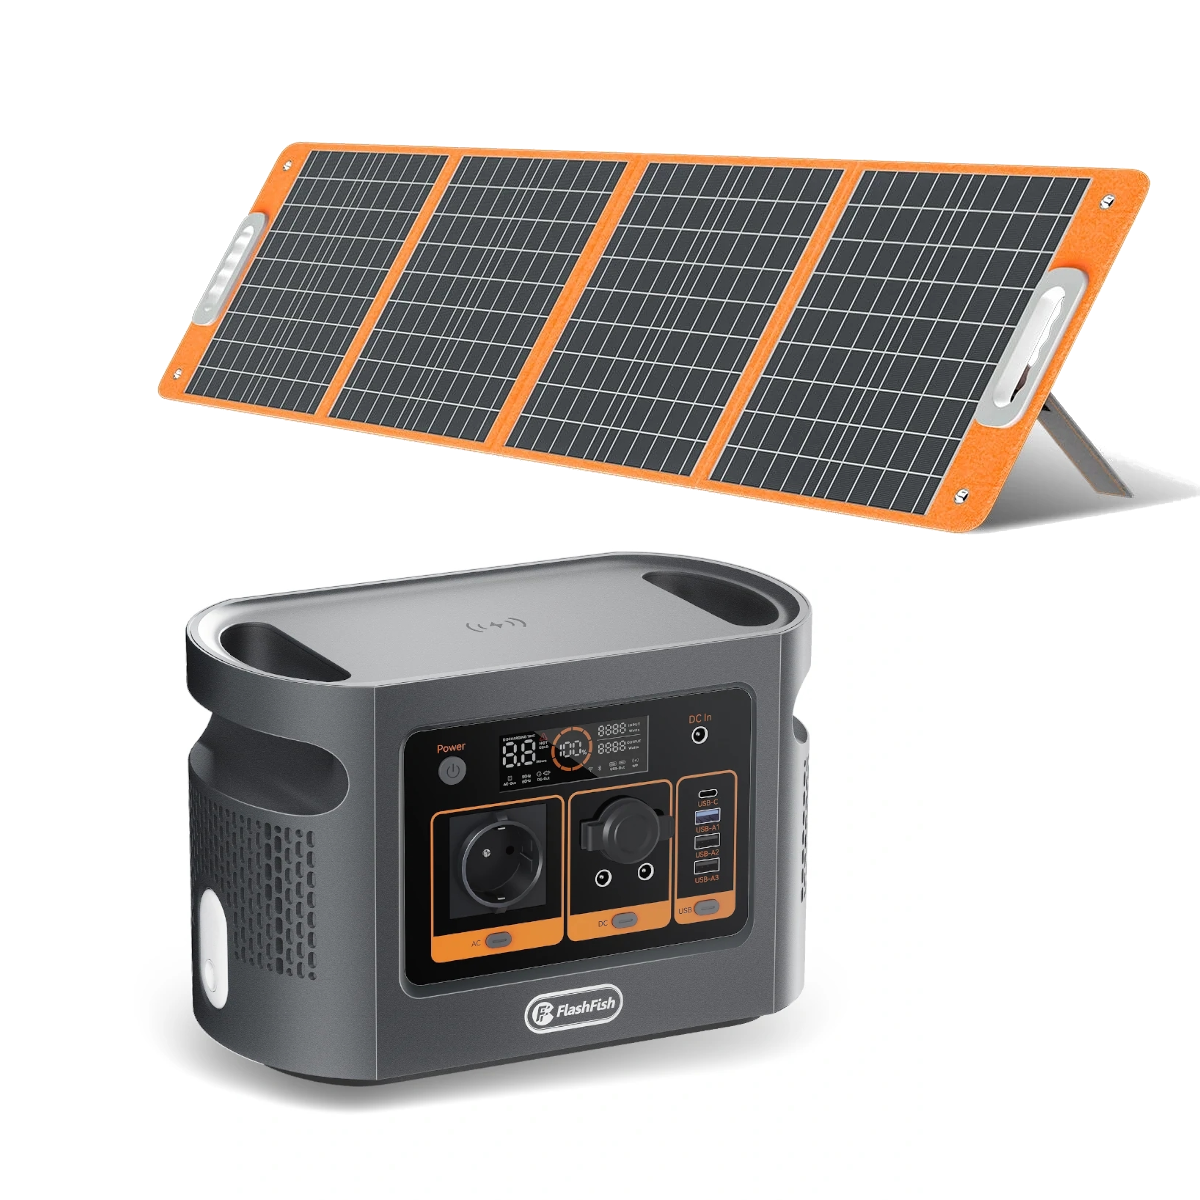 best price,flashfish,qe01d,ups,600w,448wh,power,station,lifepo4,with,solar,panel,eu,coupon,price,discount